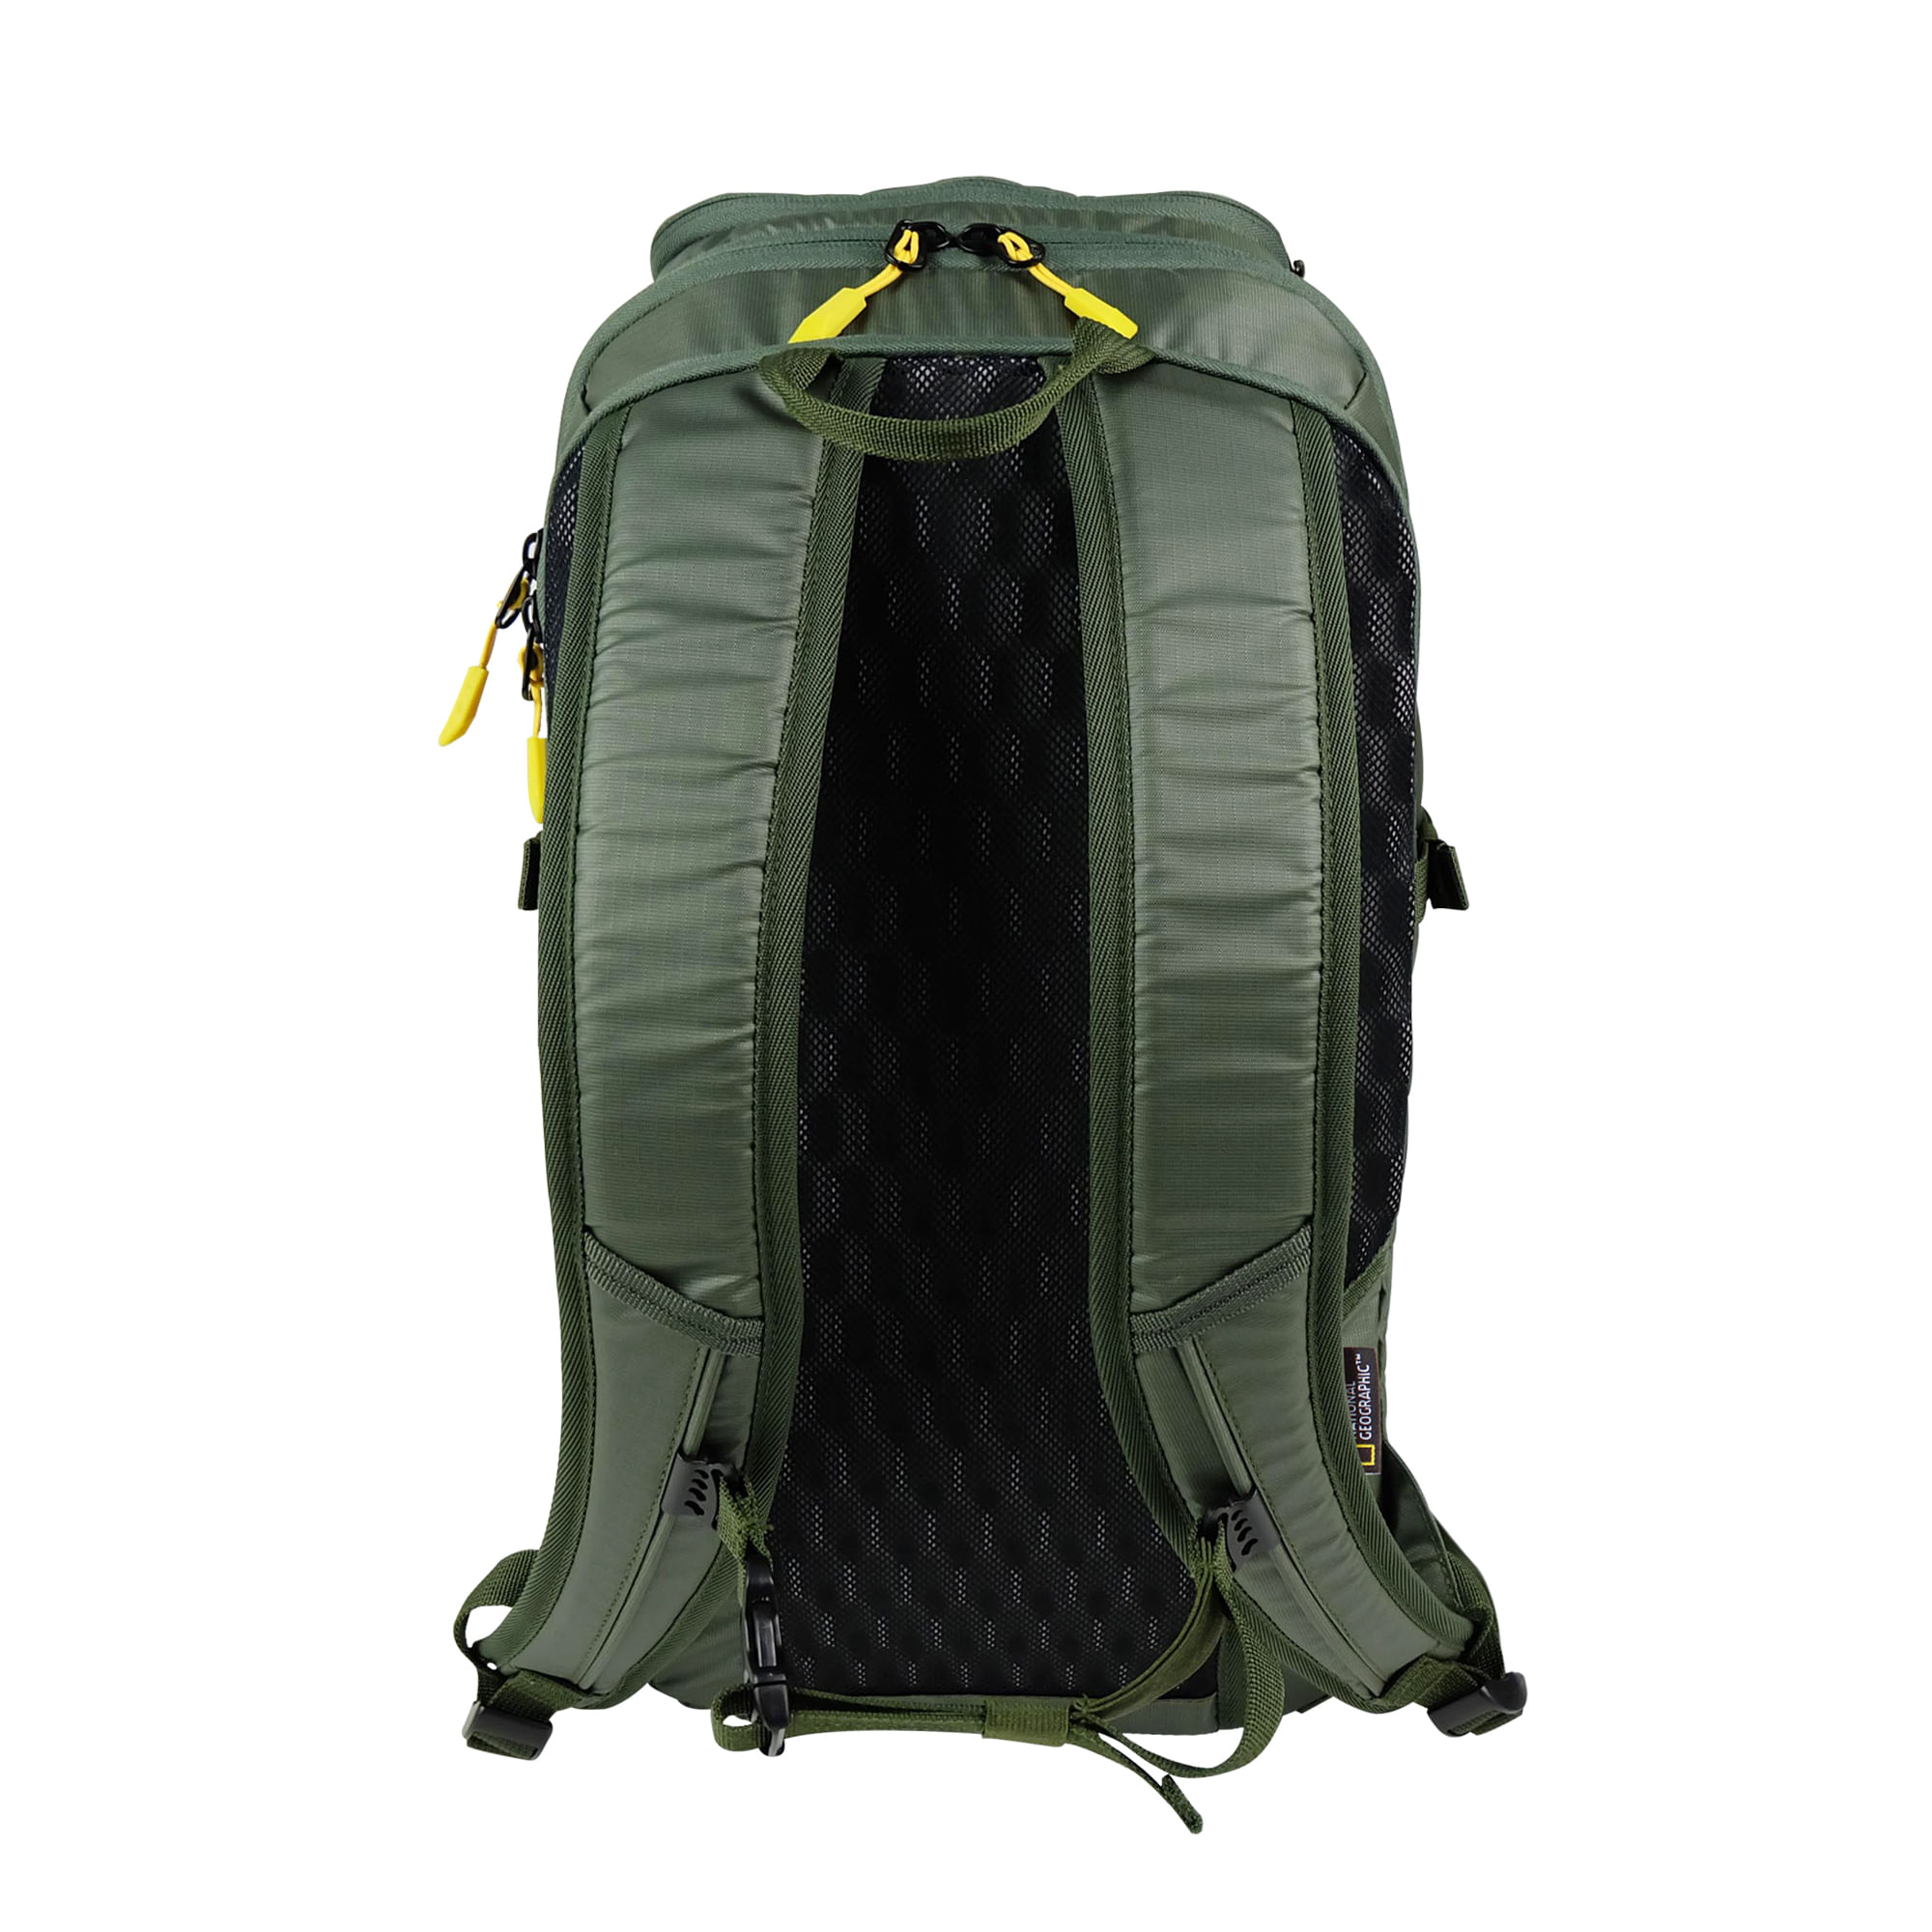 NATIONAL GEOGRAPHIC Mochila Outdoor 35 Lts National Geographic